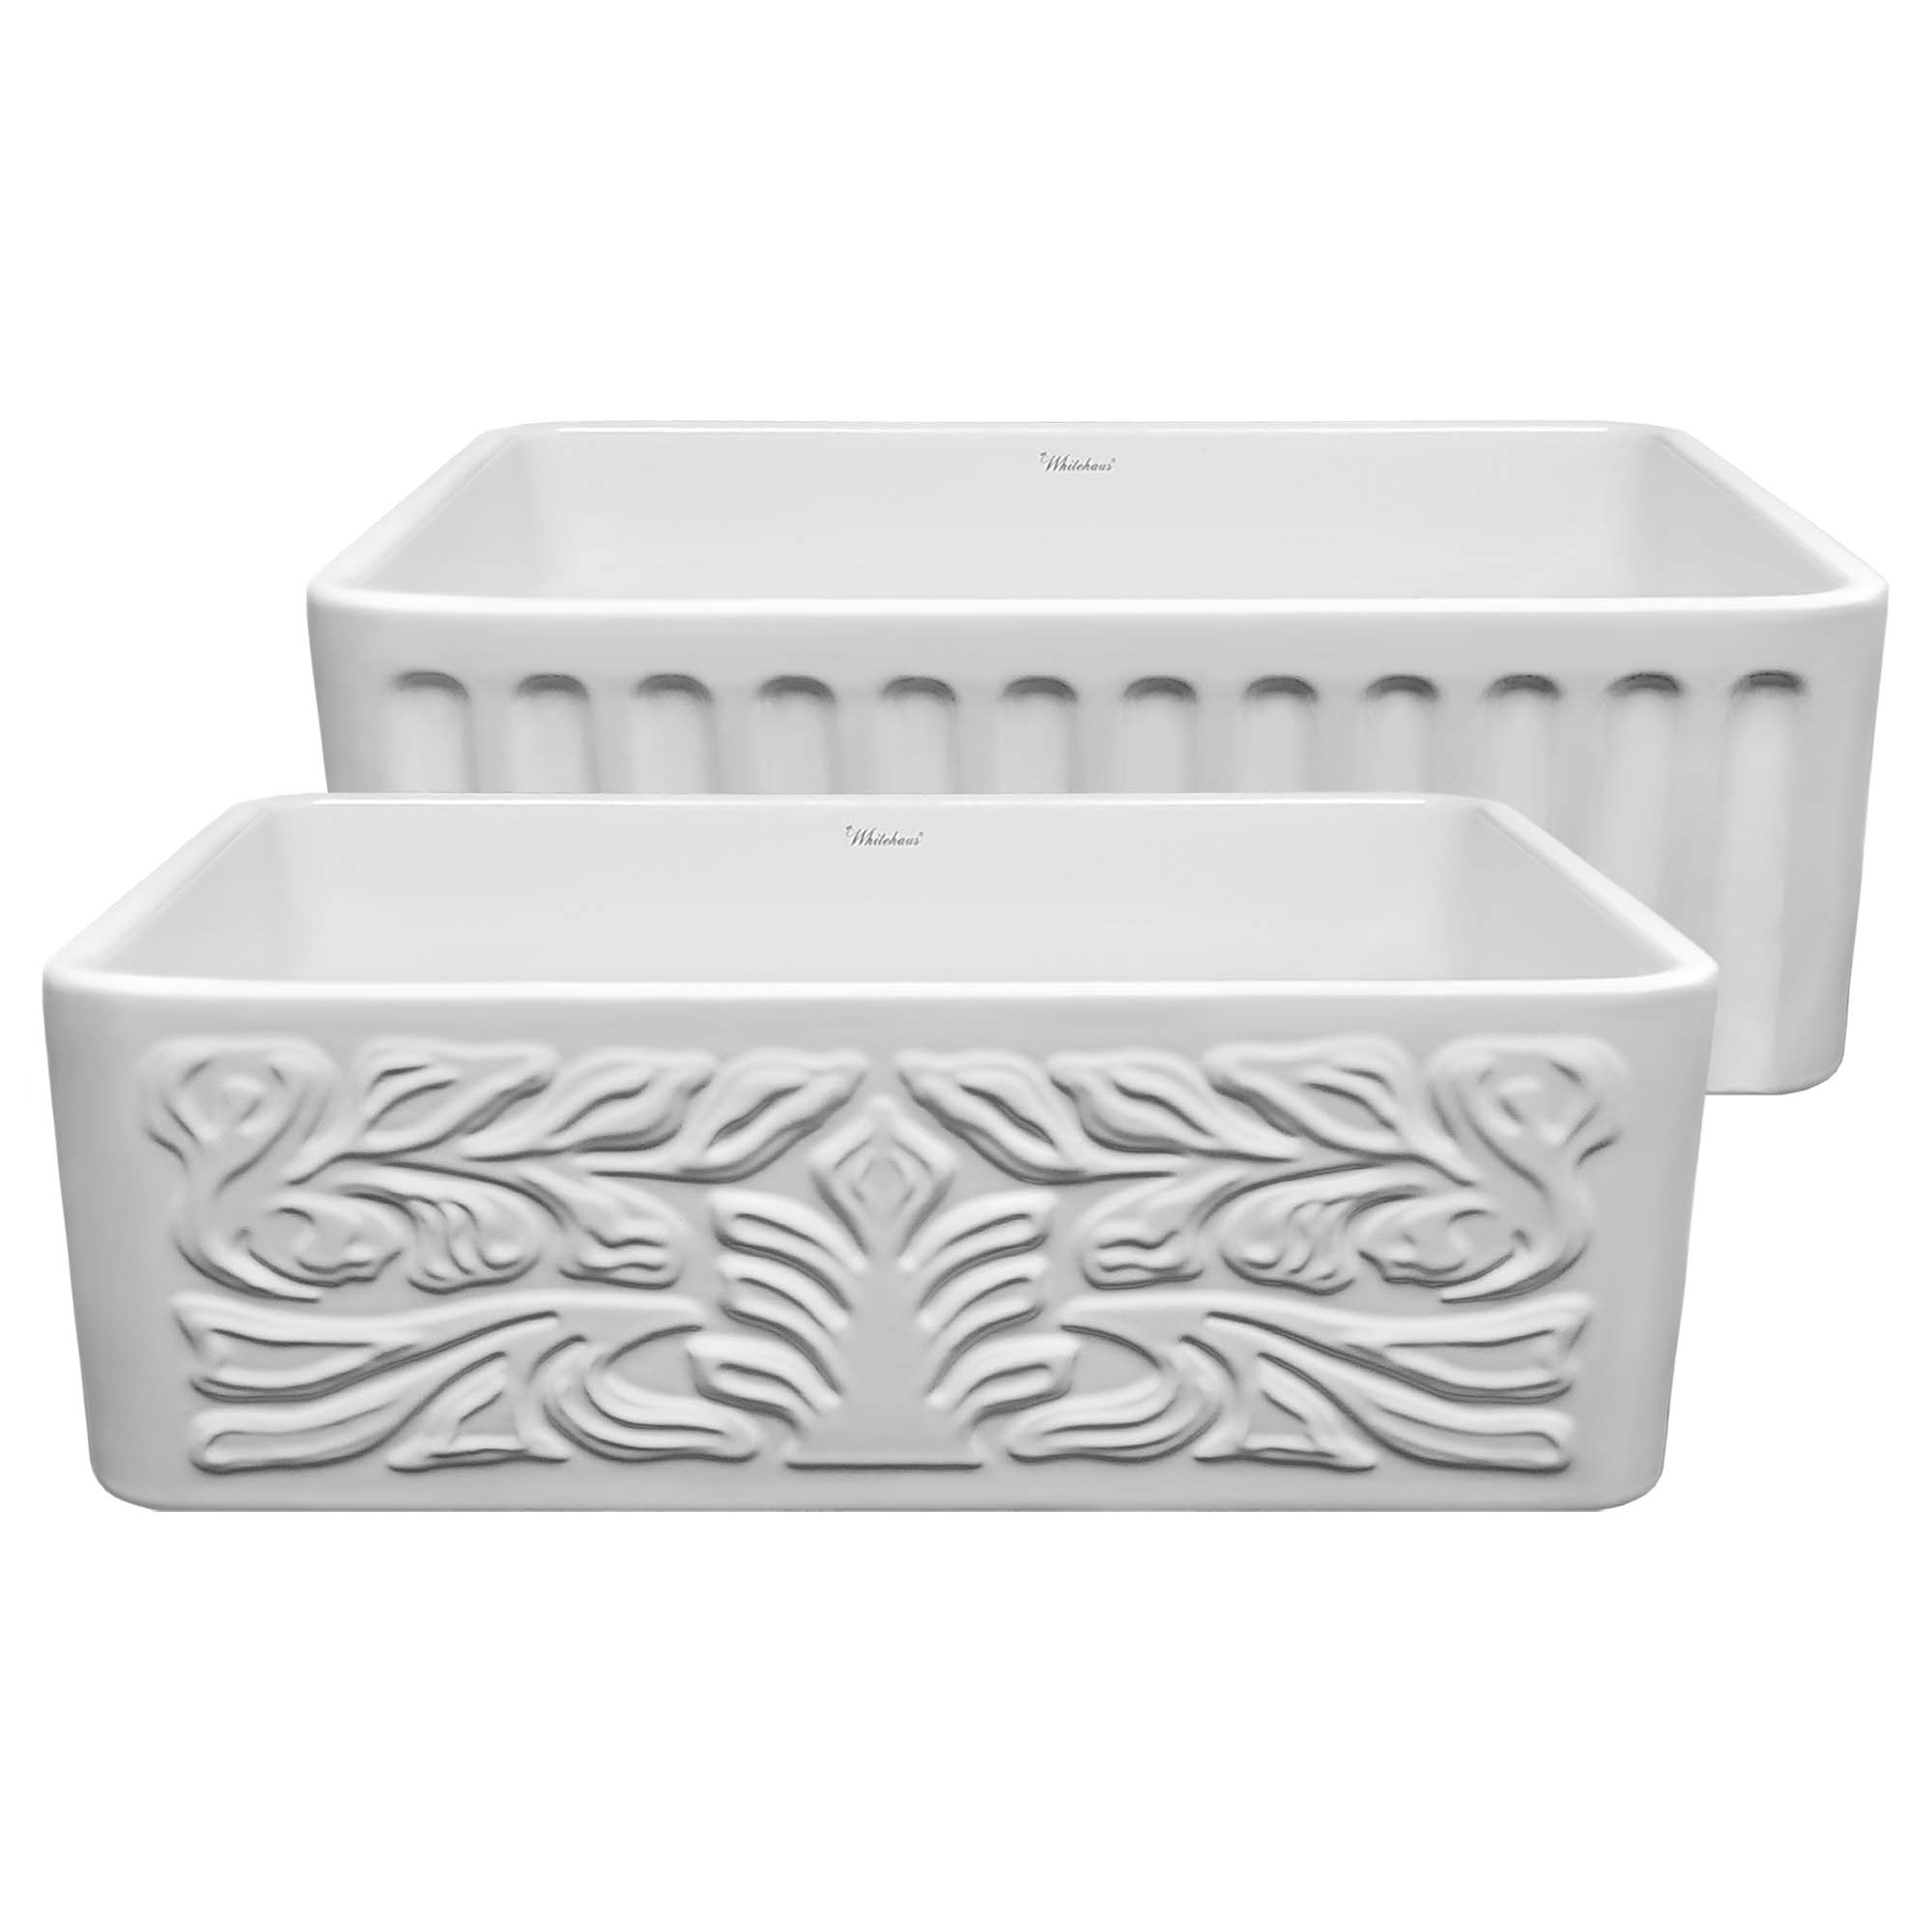 30" Reversible Single Bowl Fireclay Kitchen Sink: Roman Floral & Fluted front apron